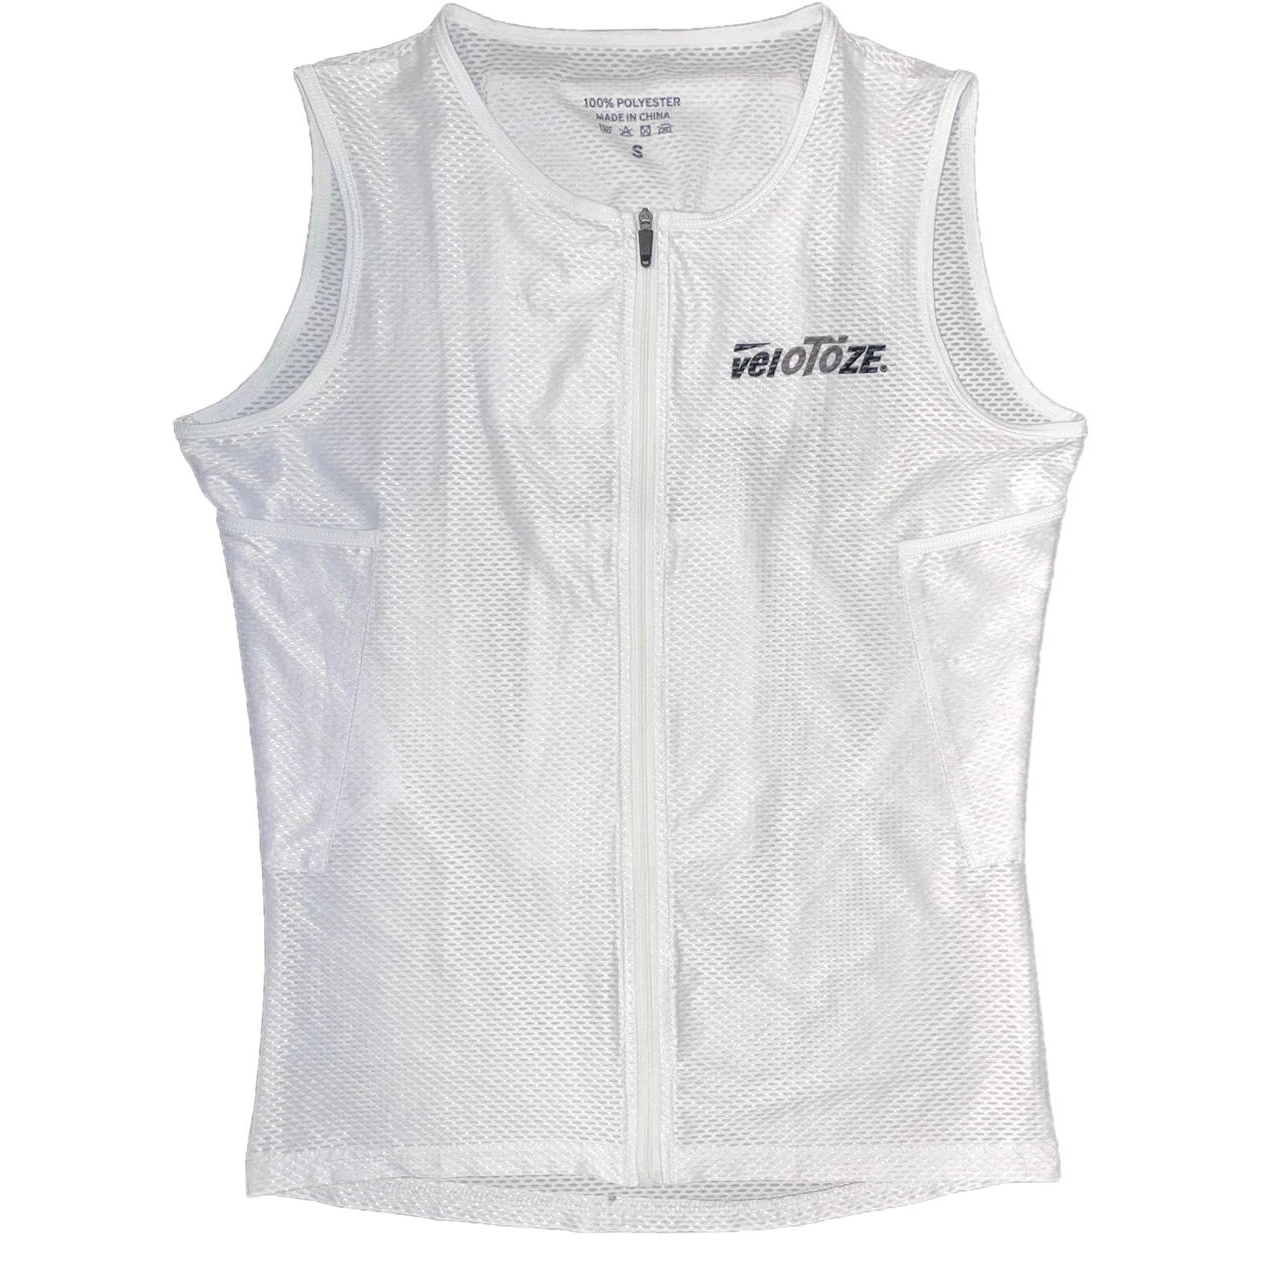 Productfoto van veloToze Cycling Cooling Vest + Cooling Packs - white